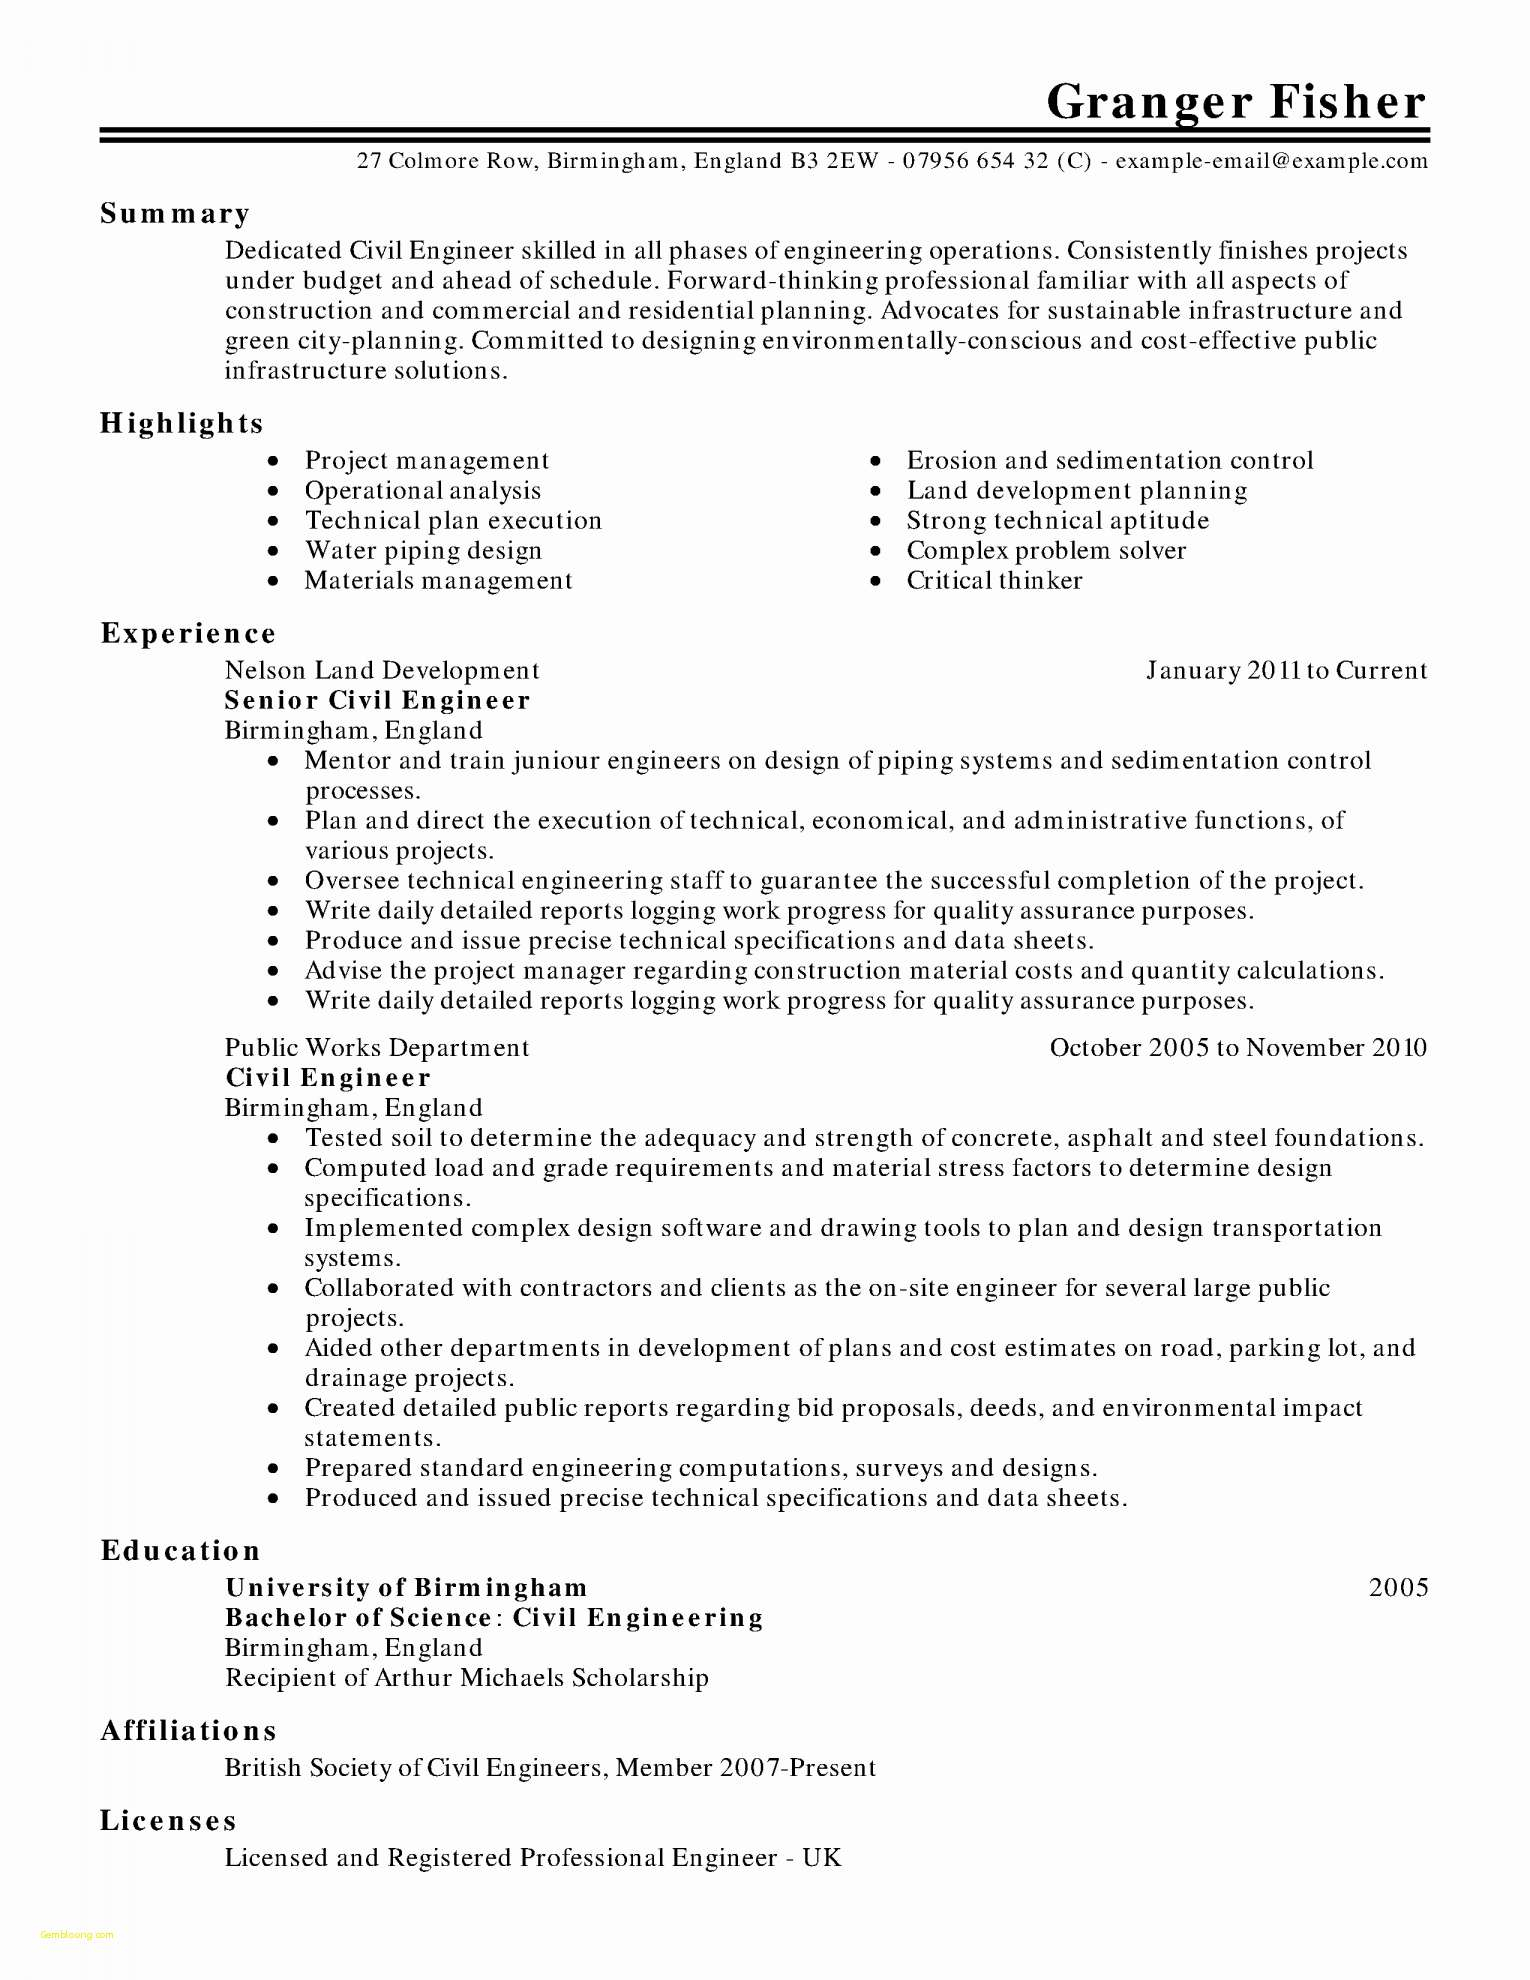 Creating A Cover Letter Template - Sample Resumes for Sales Executives Takenosumi